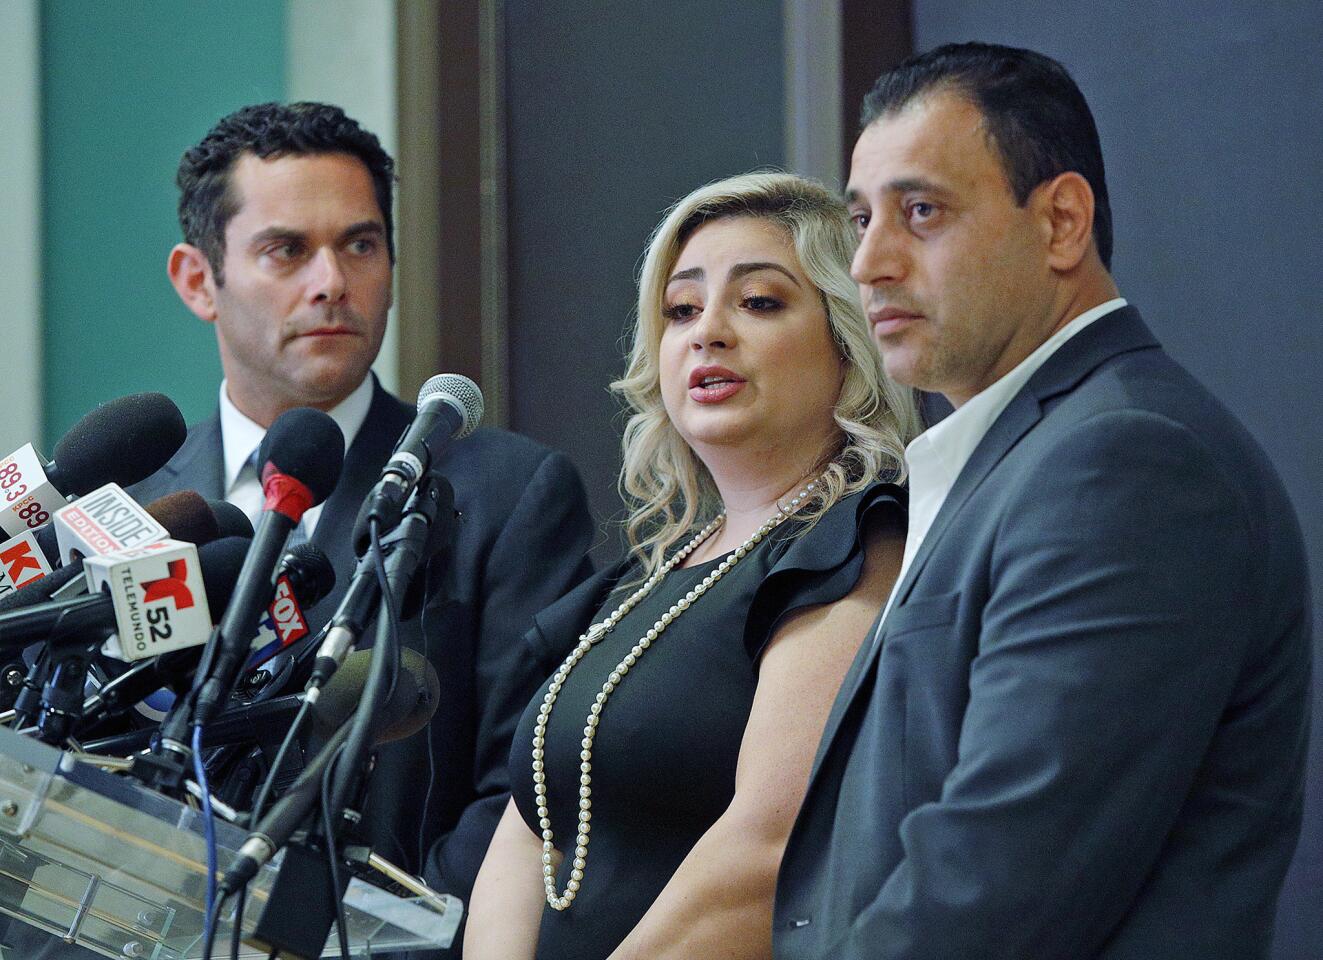 Anni and Ashot Manukyan, with attorney Adam Wolf, speak about their ordeal at a press conference to talk about the Manukyan's claim of negligence against the Los Angeles-based CHA Fertility Center at La Plaza de Cultura y Artes in Los Angeles on Wednesday. The Glendale couple is suing CHA Health Systems and CHA Fertility Center for negligence in the handling of their genetic samples in an effort to have a baby. Their sample was used for a couple in New York to conceive a baby while the Manukyan's were given a sperm/egg sample from yet a different couple, a case involving three different couples.